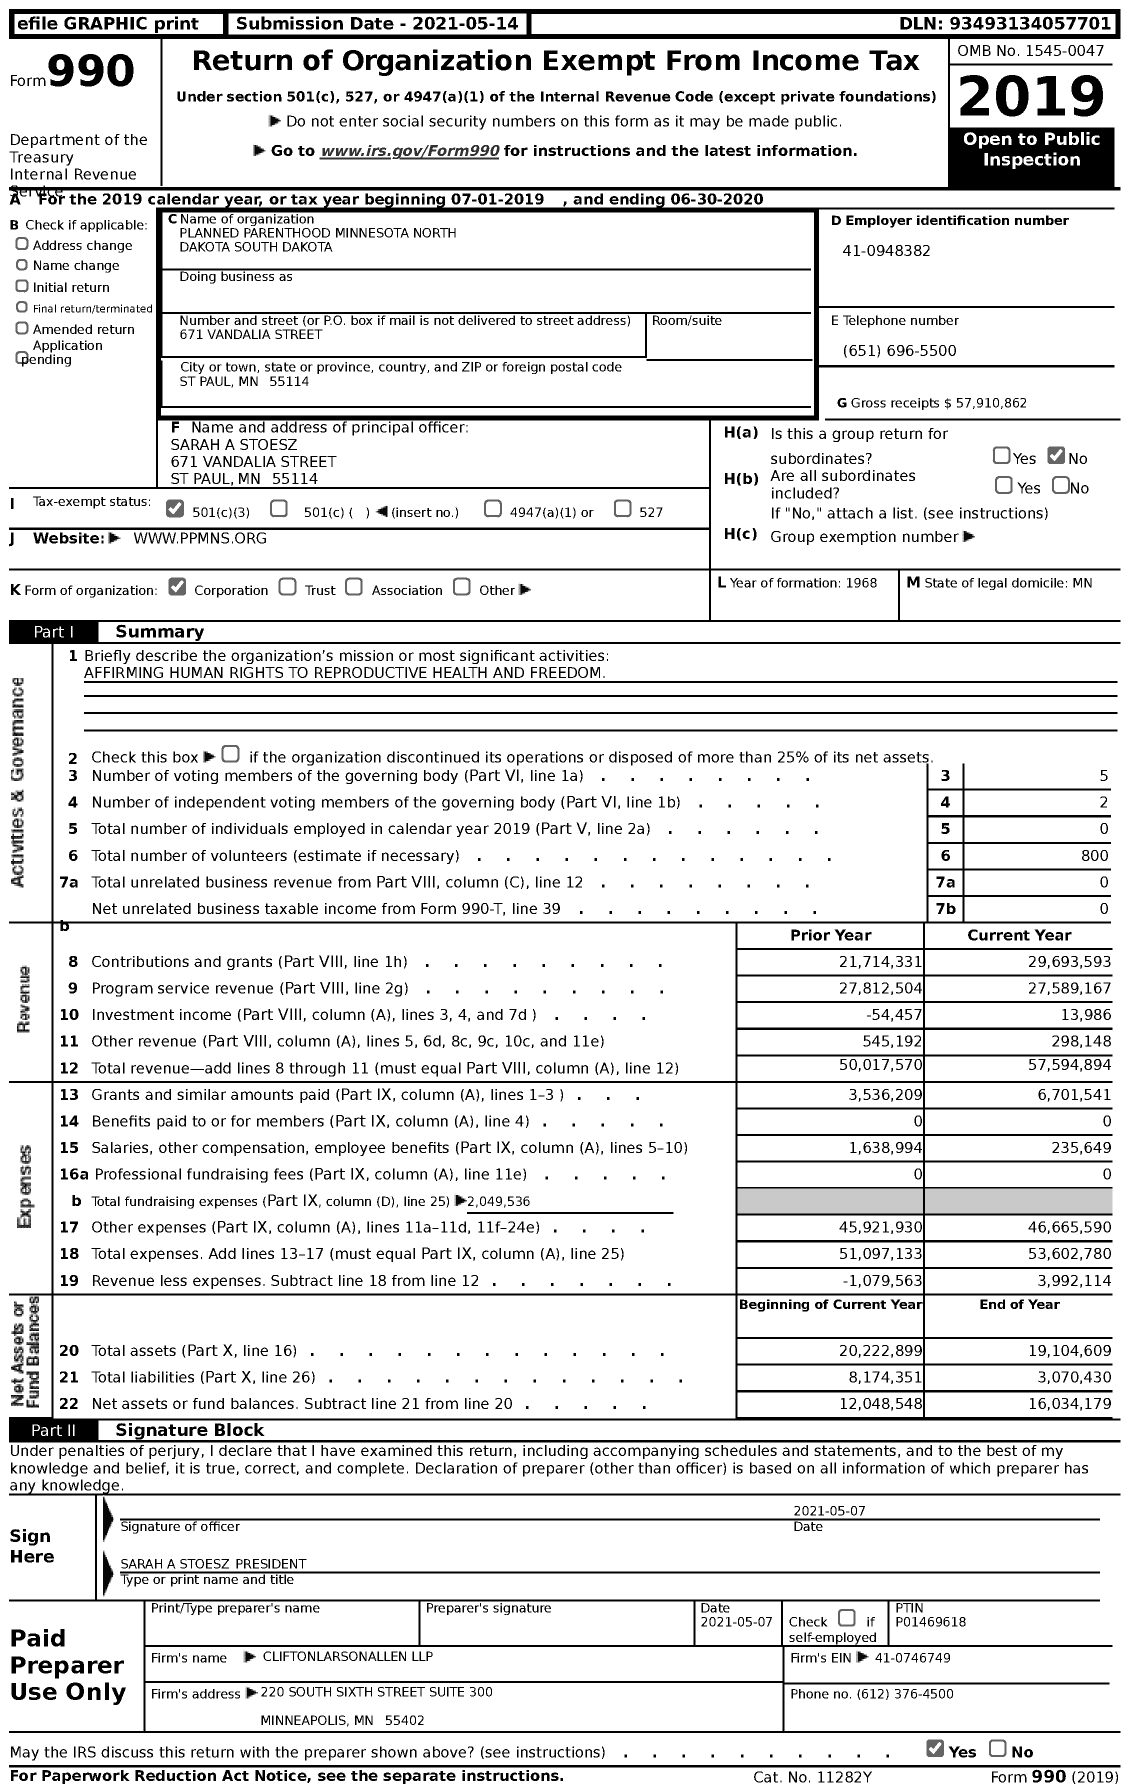 Image of first page of 2019 Form 990 for Planned Parenthood Minnesota North Dakota South Dakota (PPMNS)